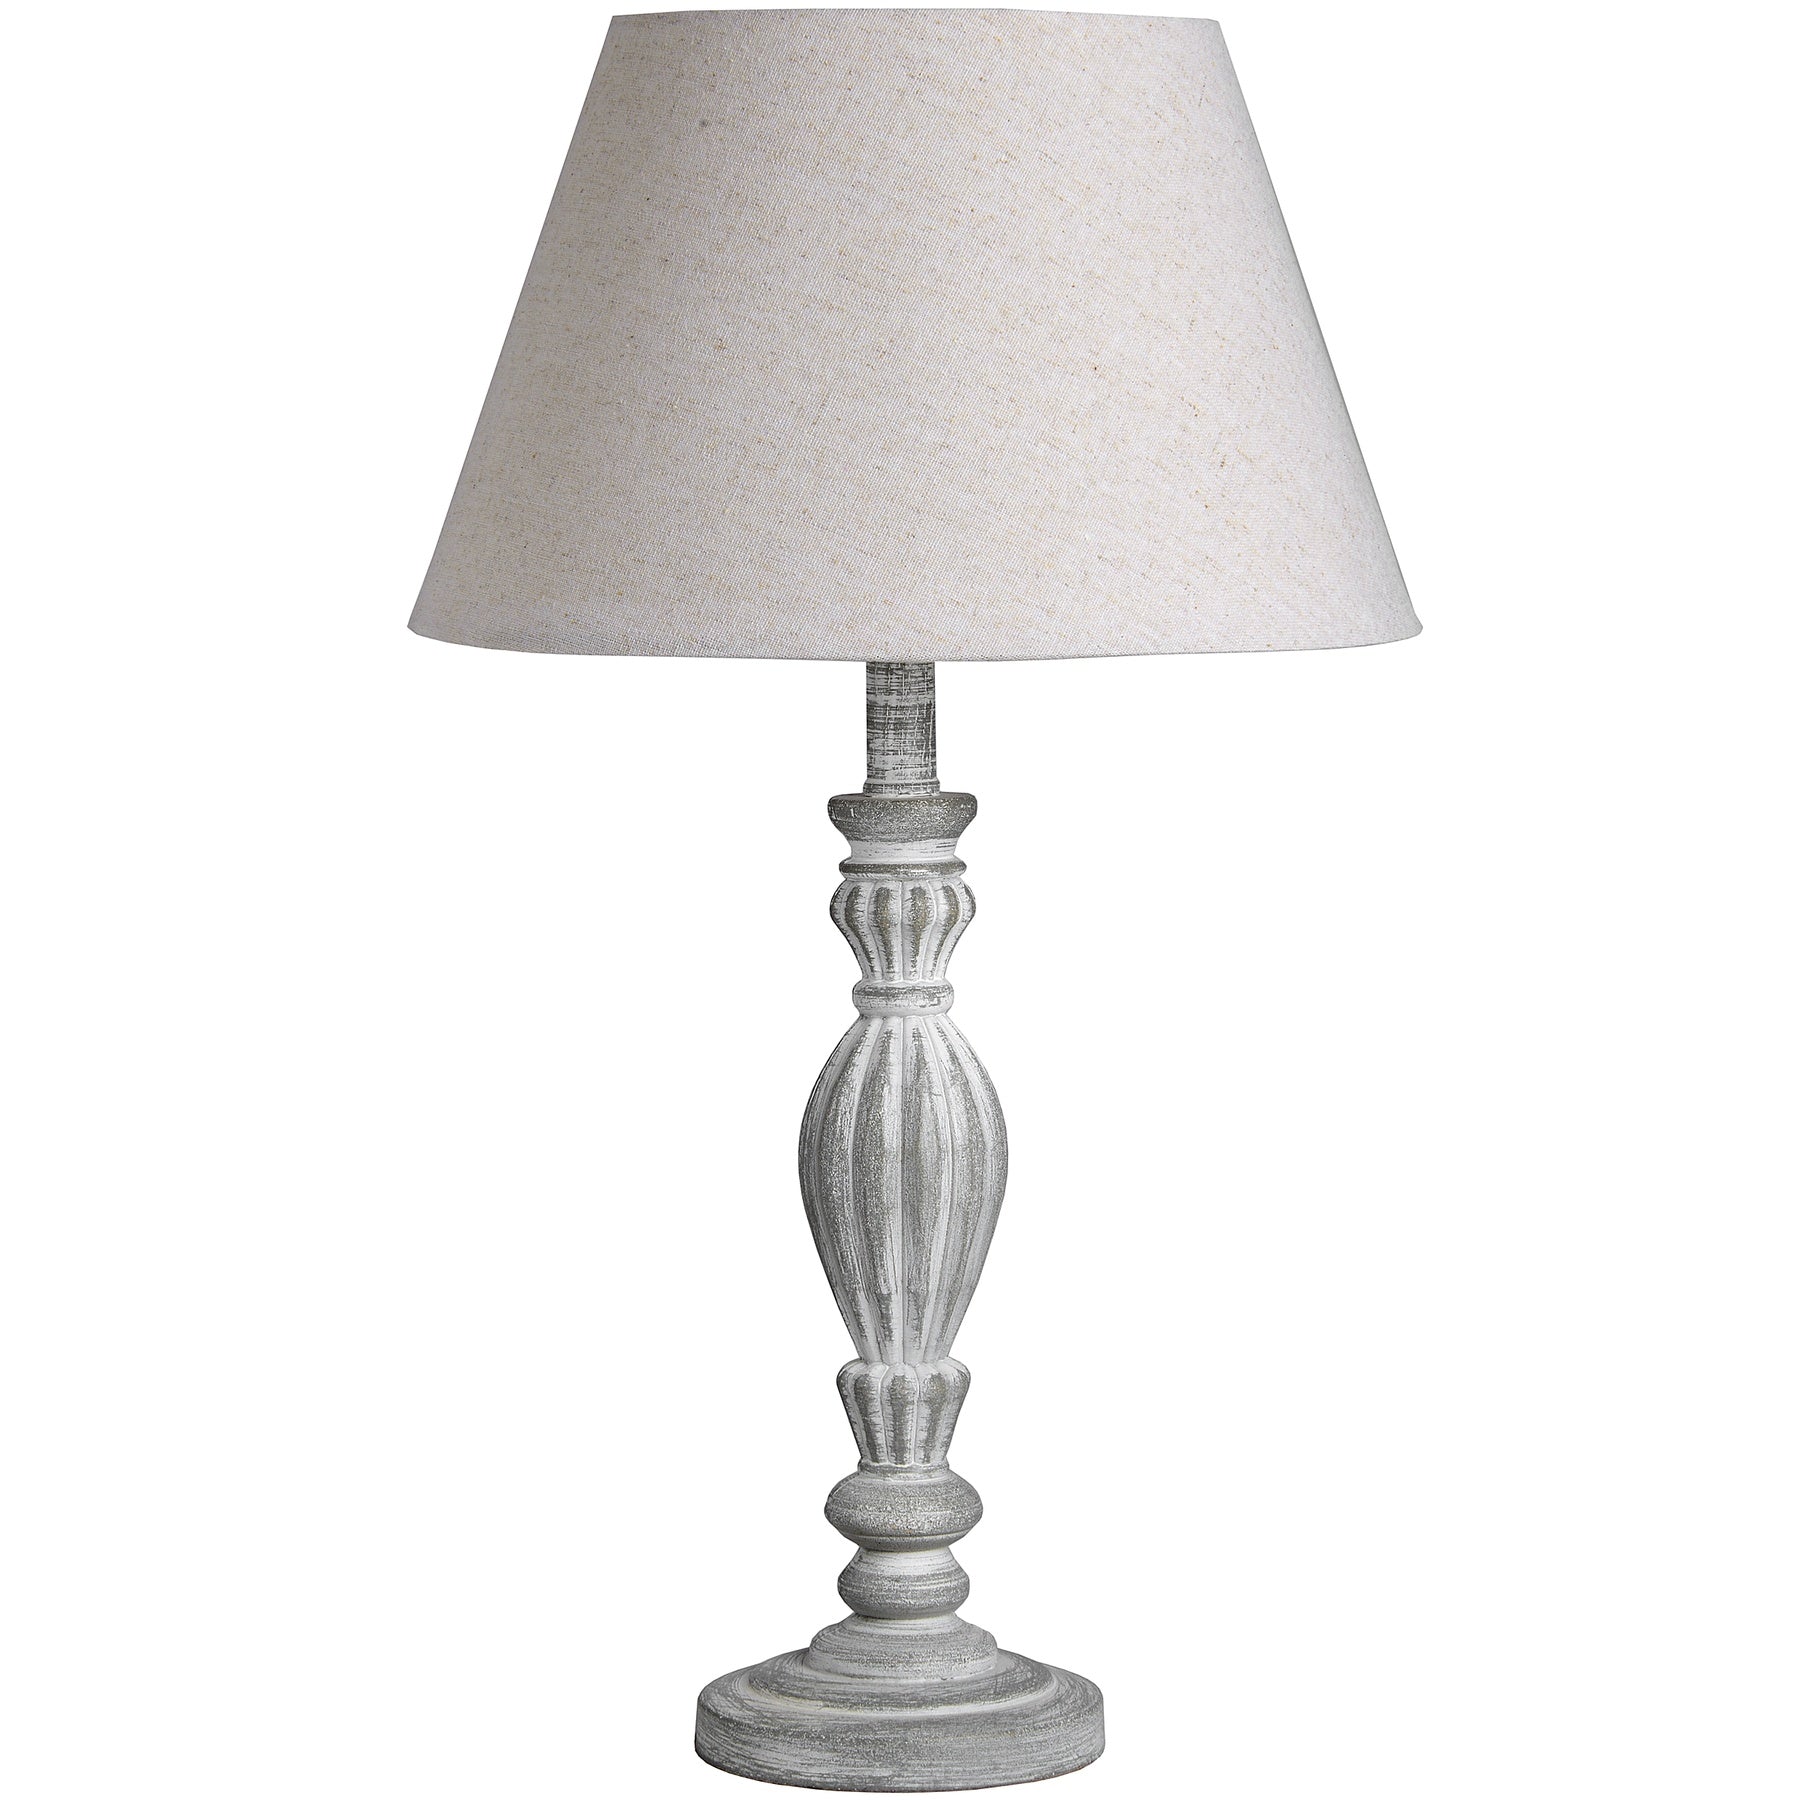 Aegina Table Lamp has a shaped column  base  a grey base colour with a white wash over it comes with a natural Linen lampshade will match any  home decor or colour palette, 